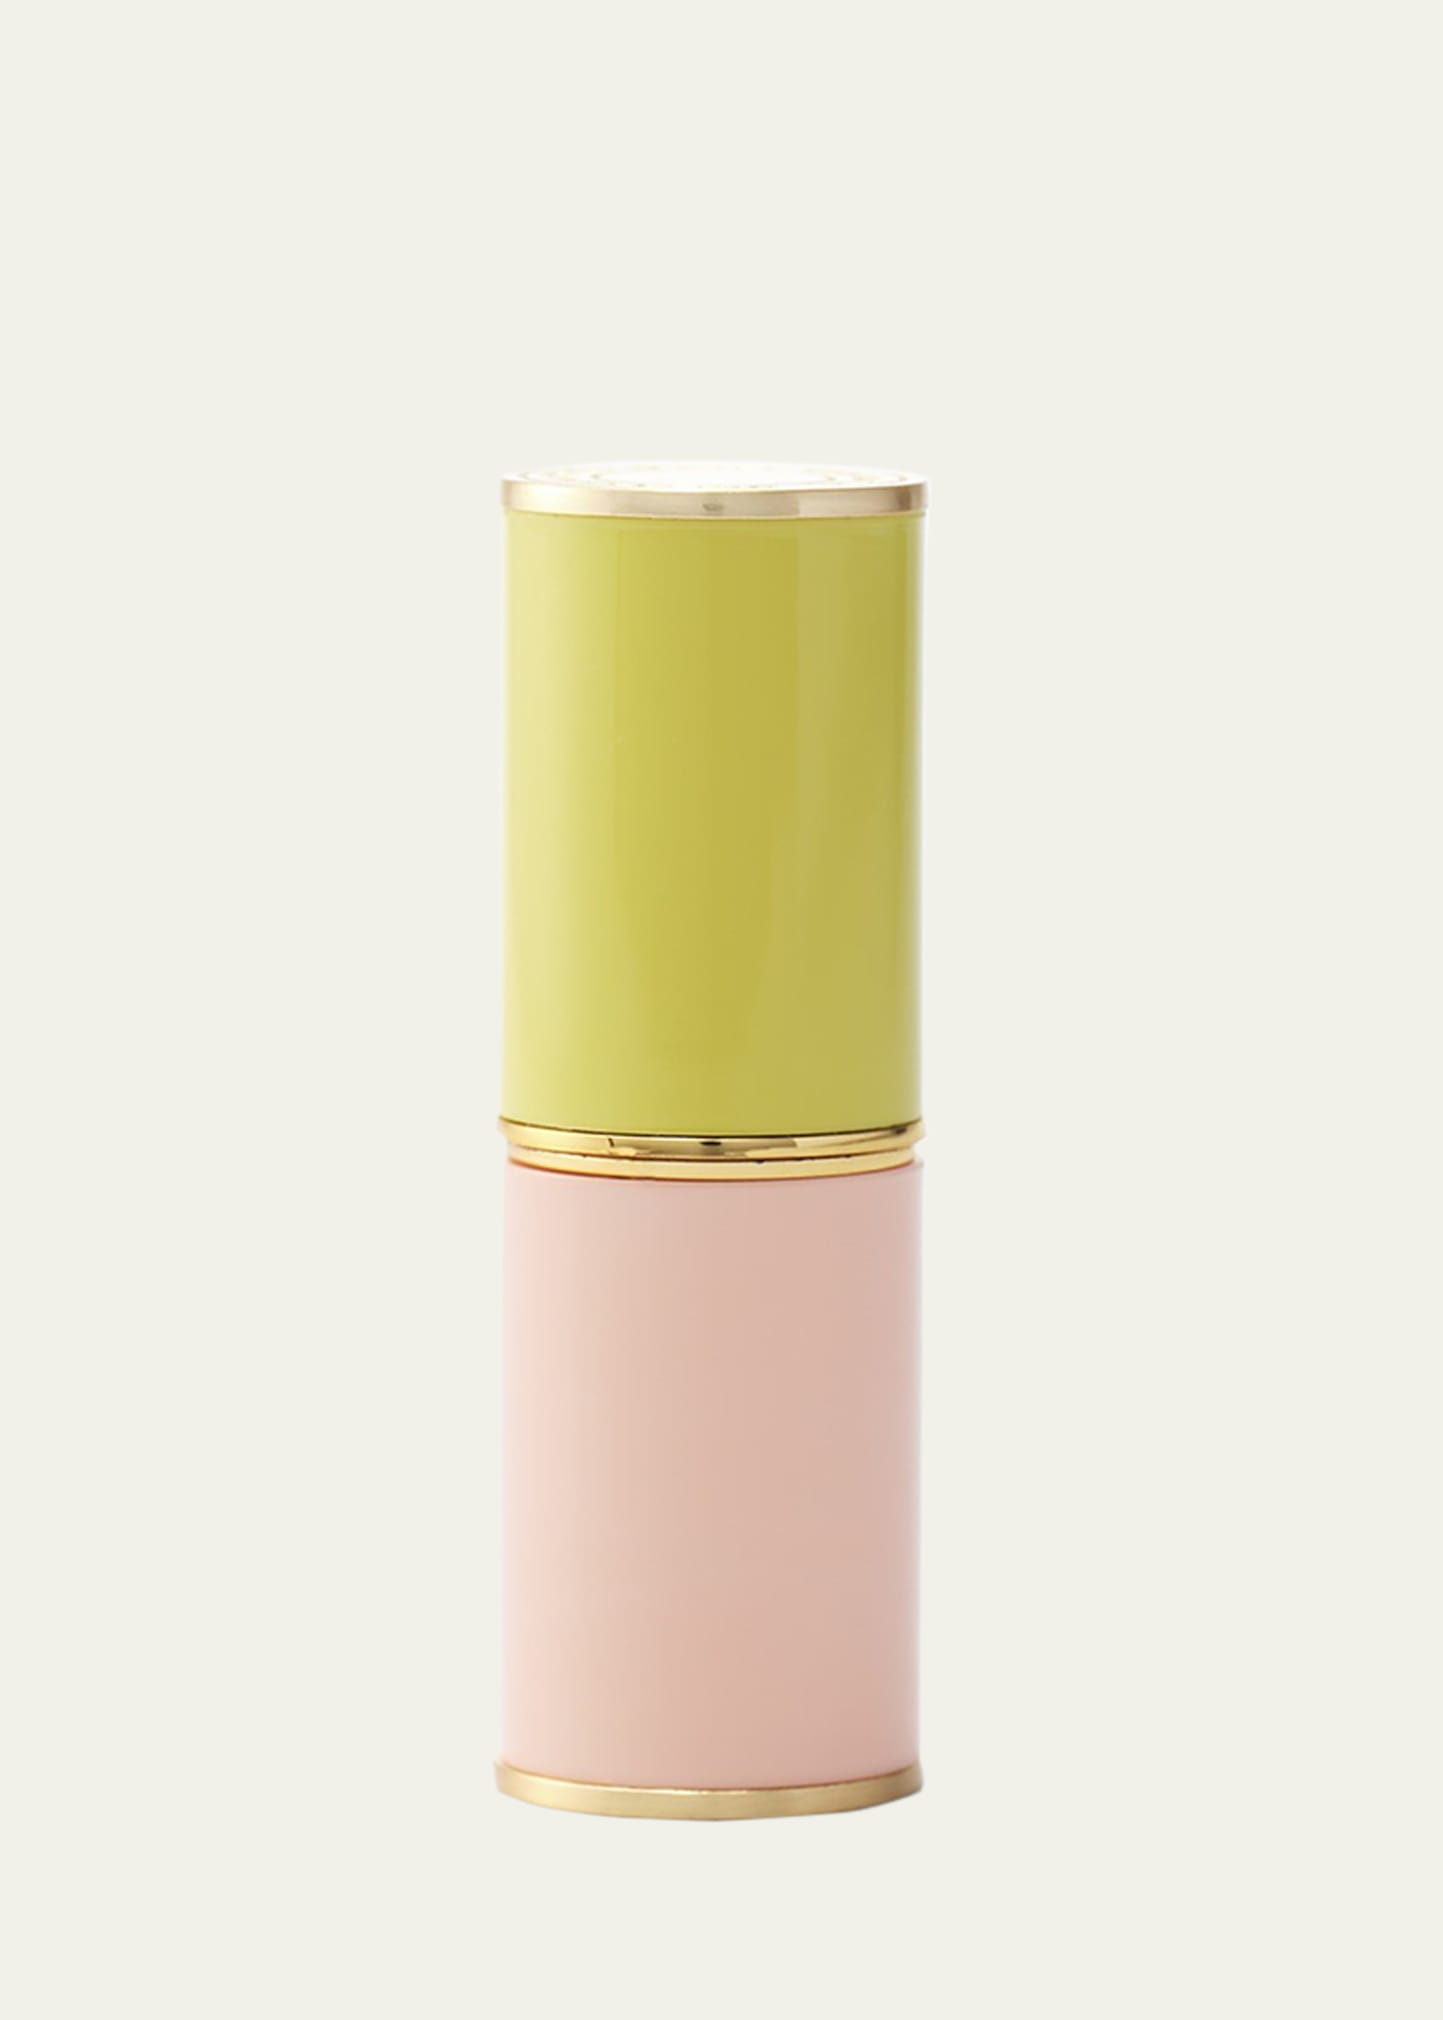 Dries Van Noten Refillable Lipstick Case, Acid Blush In Pink And Yellow